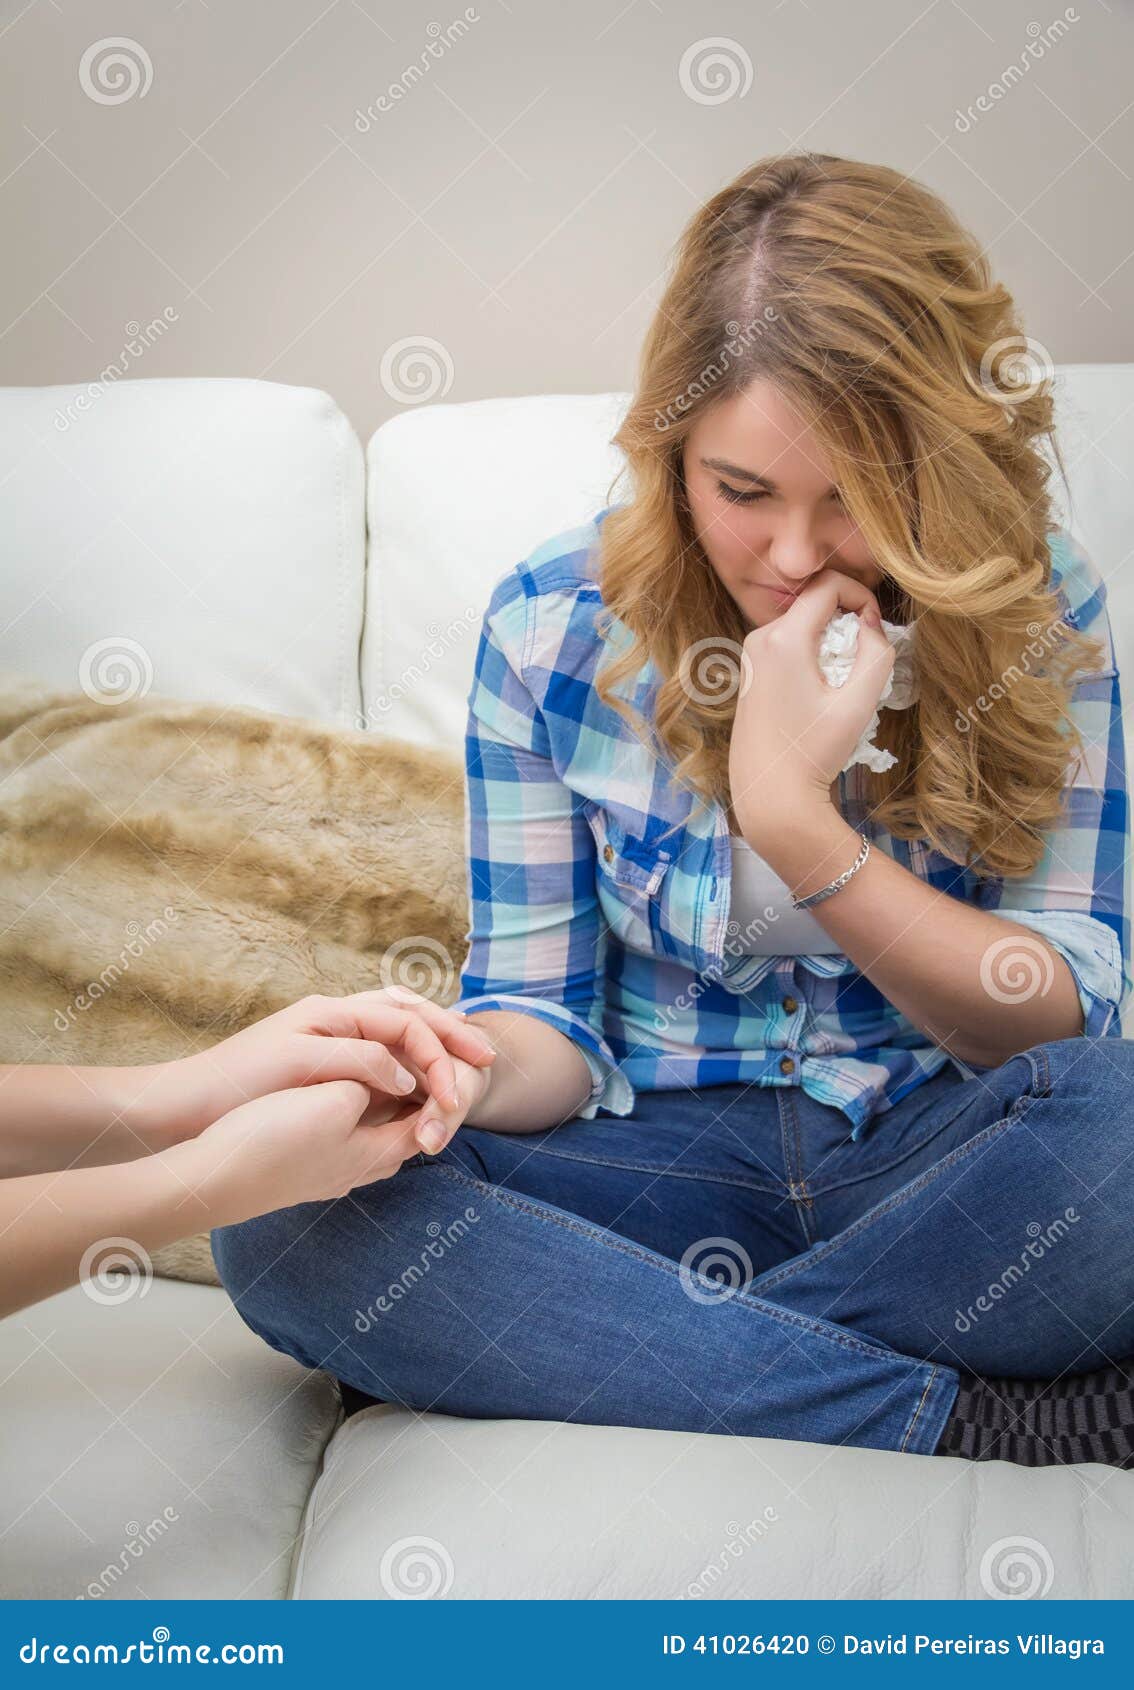 Hands Of Mother Consoling Sad Teen Daughter Crying Stock